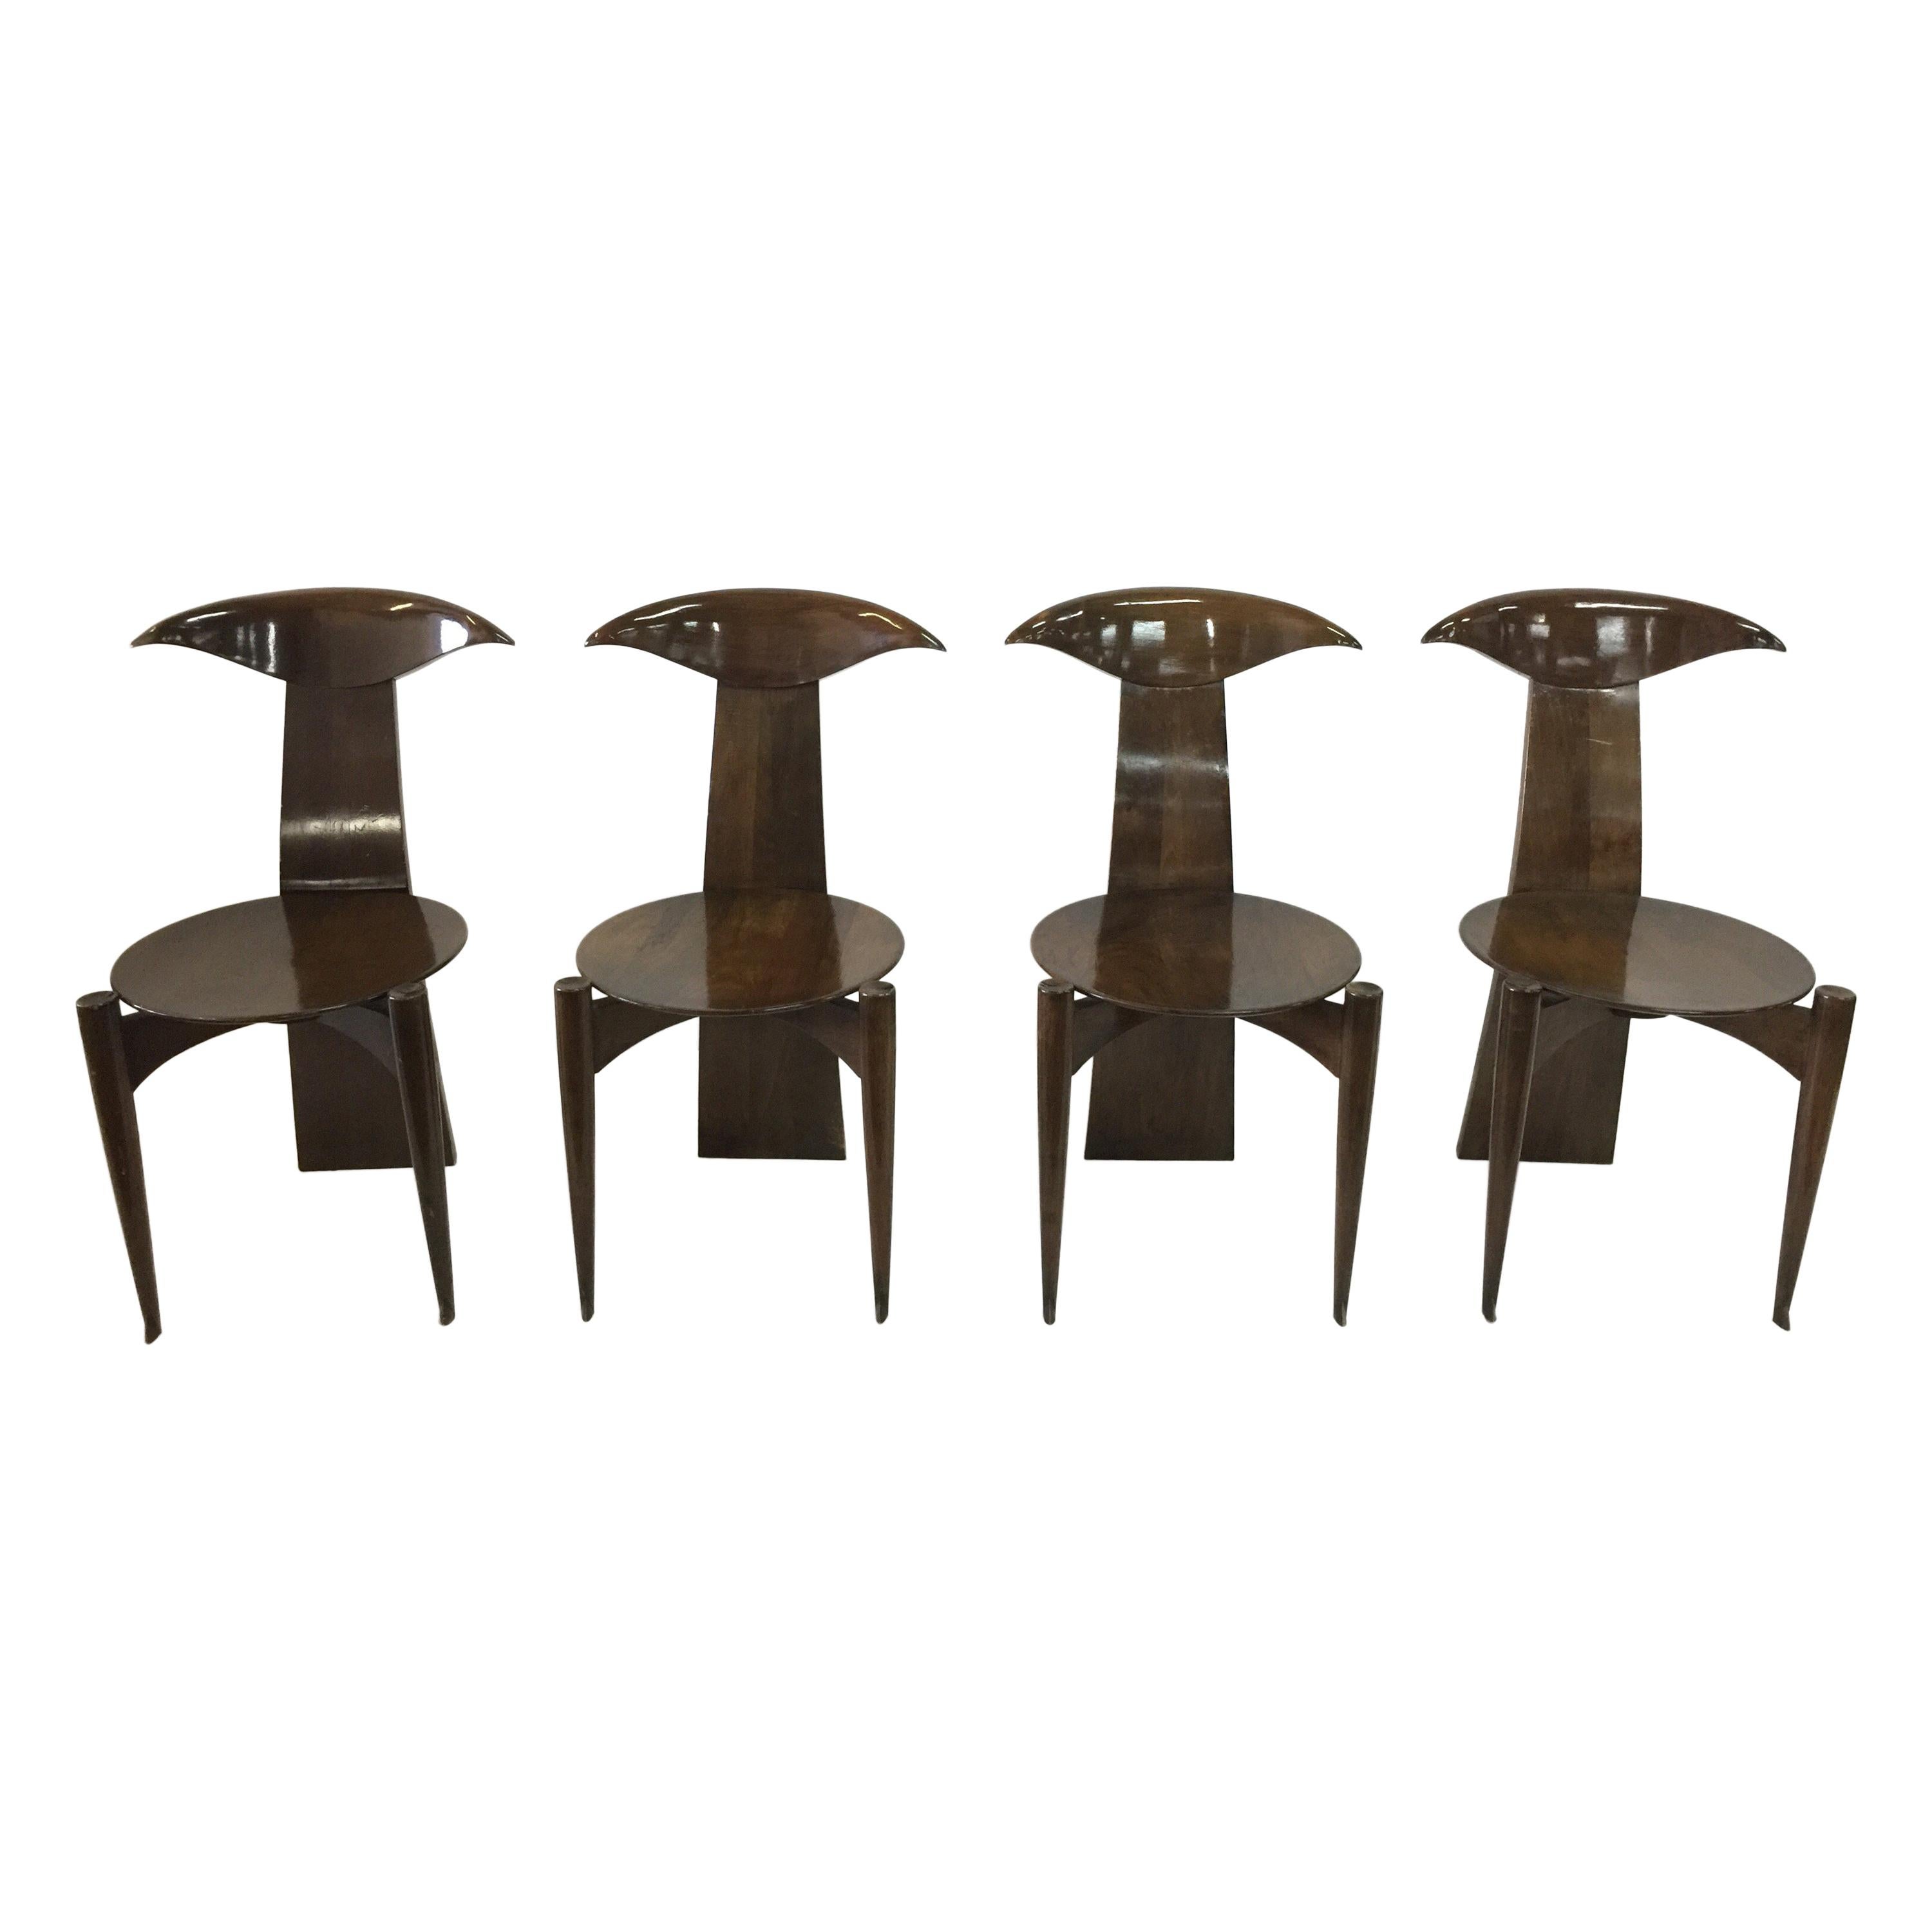 Modernist Mahogany Dining Chairs, Set of 4